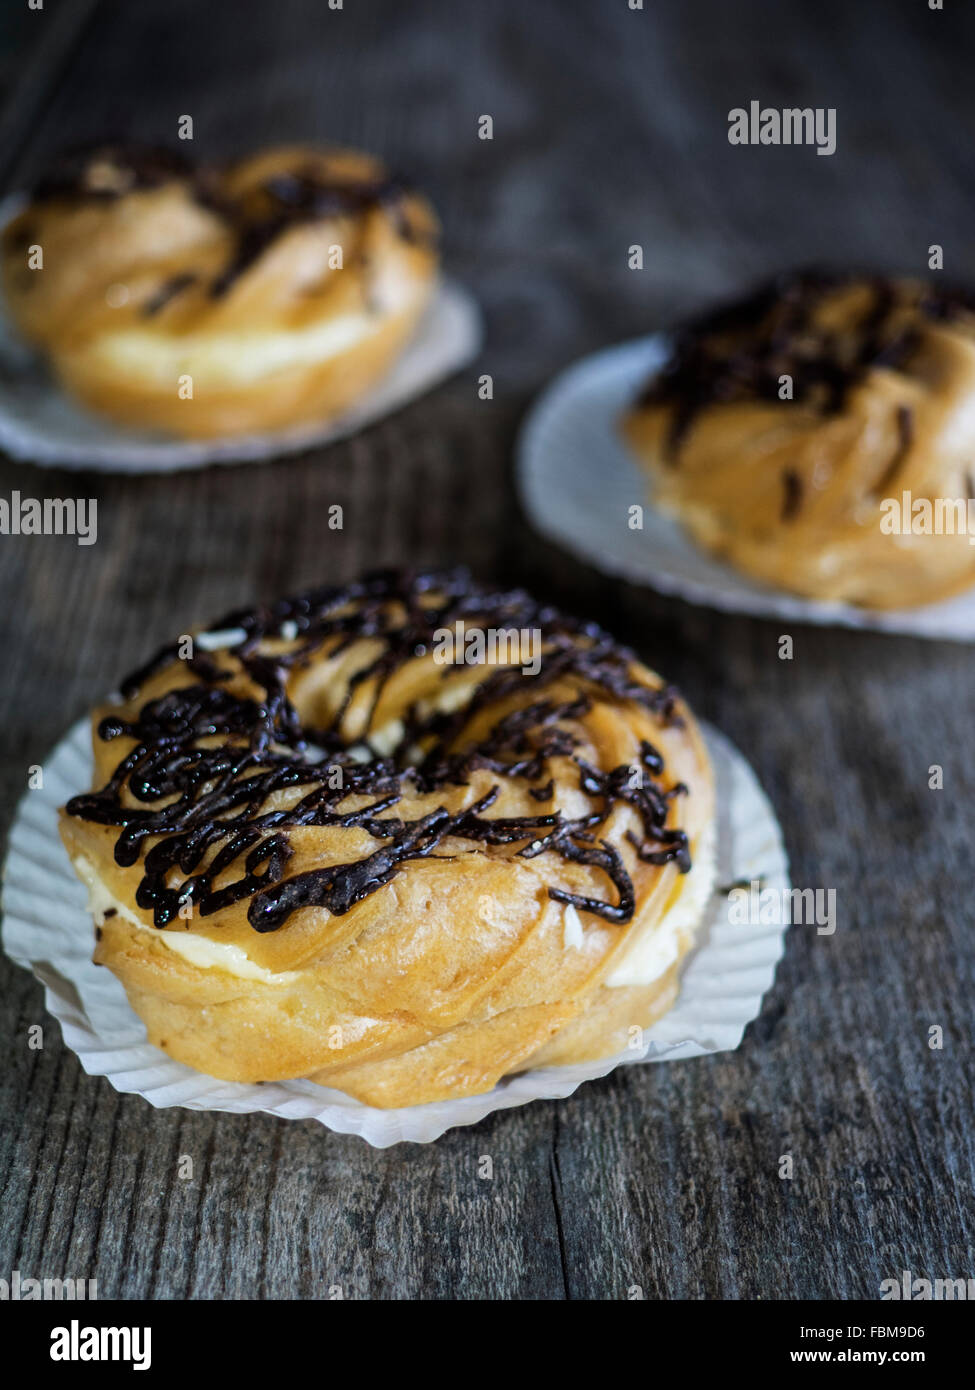 Three donuts on a wooden table Stock Photo